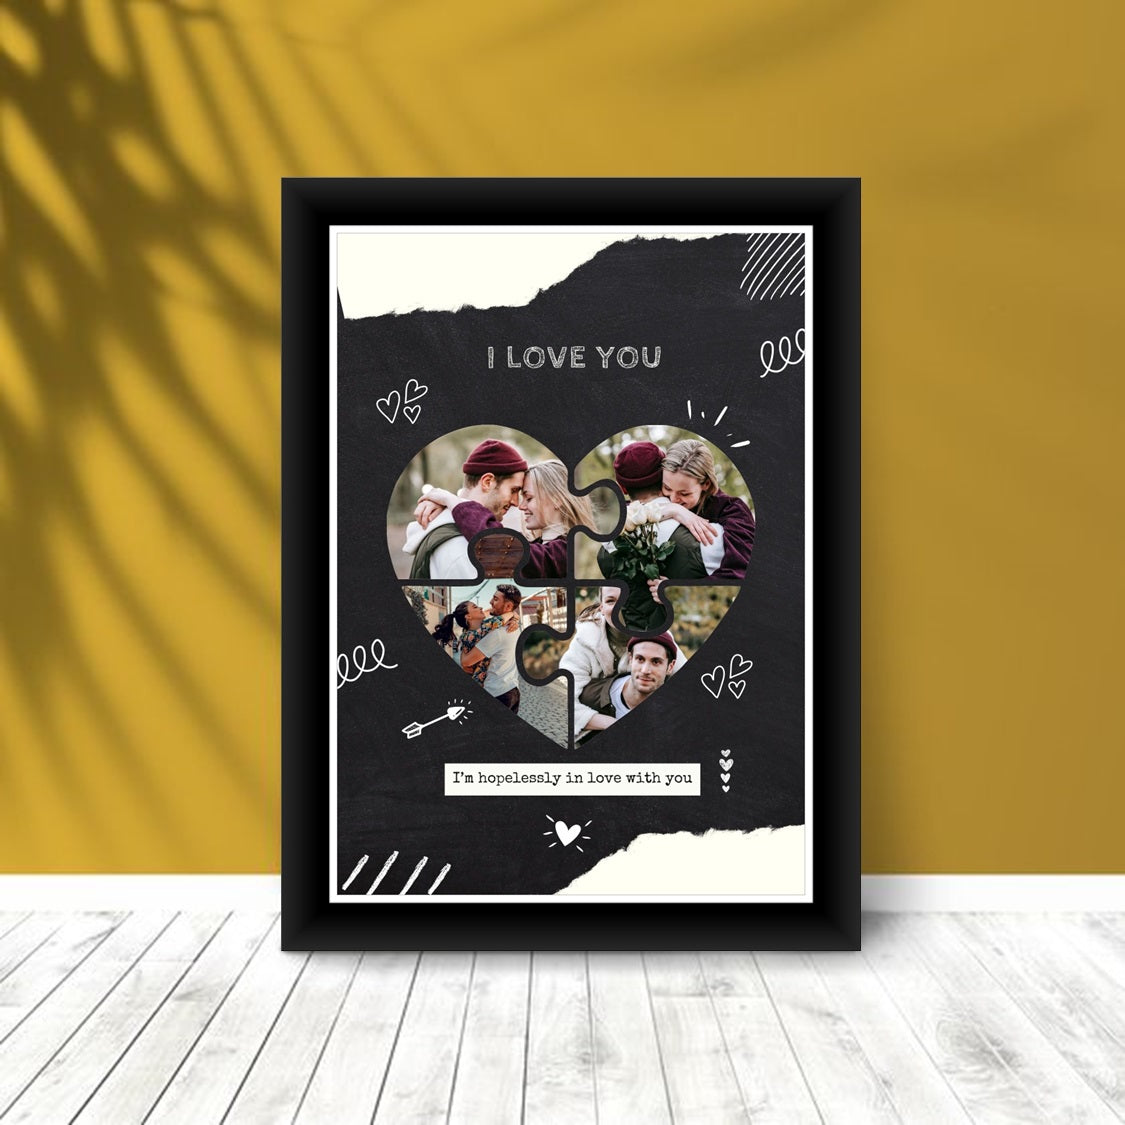 Buy or send Heartwarming Memories Frame online to your loved ones in India by Bakers Wagon